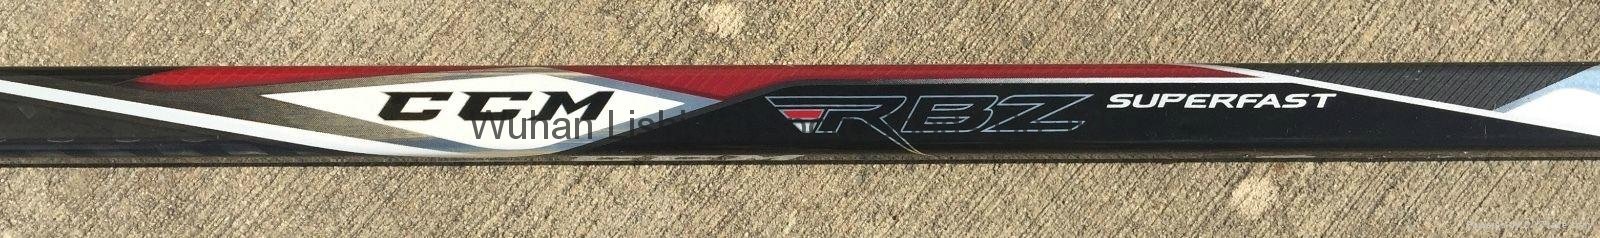 CCM RBZ Superfast Pro Stock Hockey Stick All Flex All Curves Left and Right 4